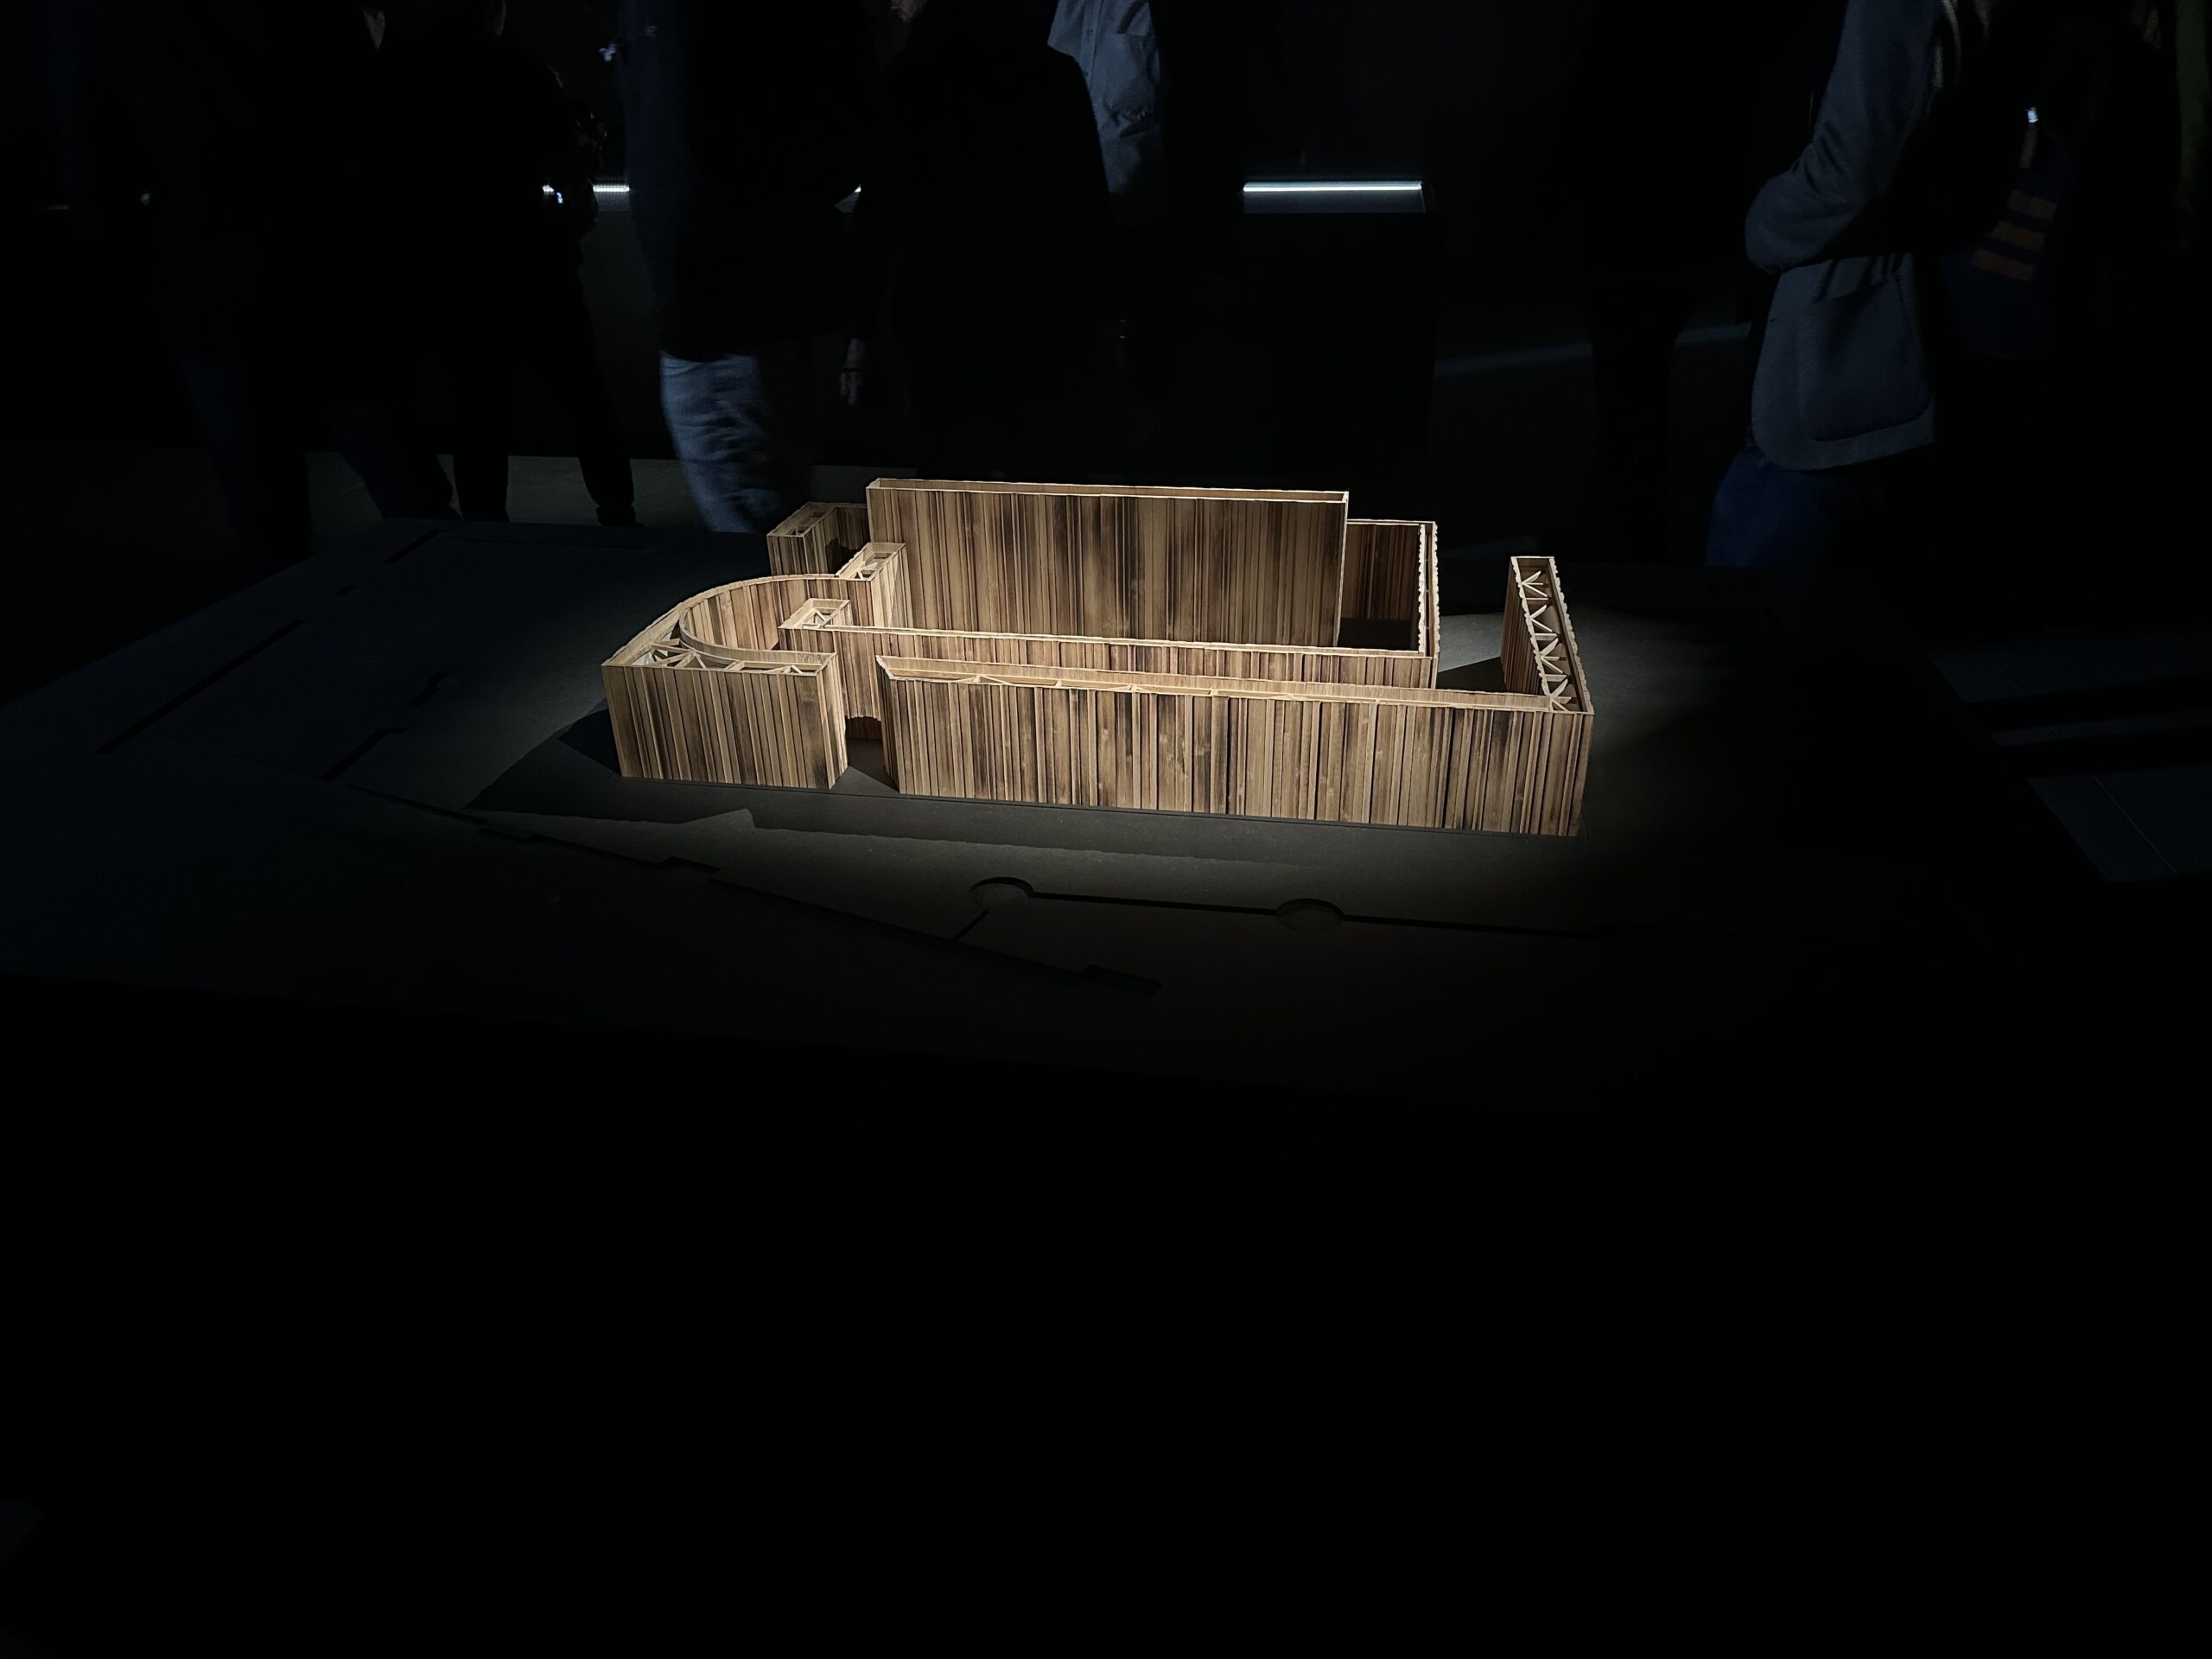 A model of a wooden labyrinth, in a darkened room, with just the labyrinth light brightly. The wood used to create the labyrinth has been darkened by burning.